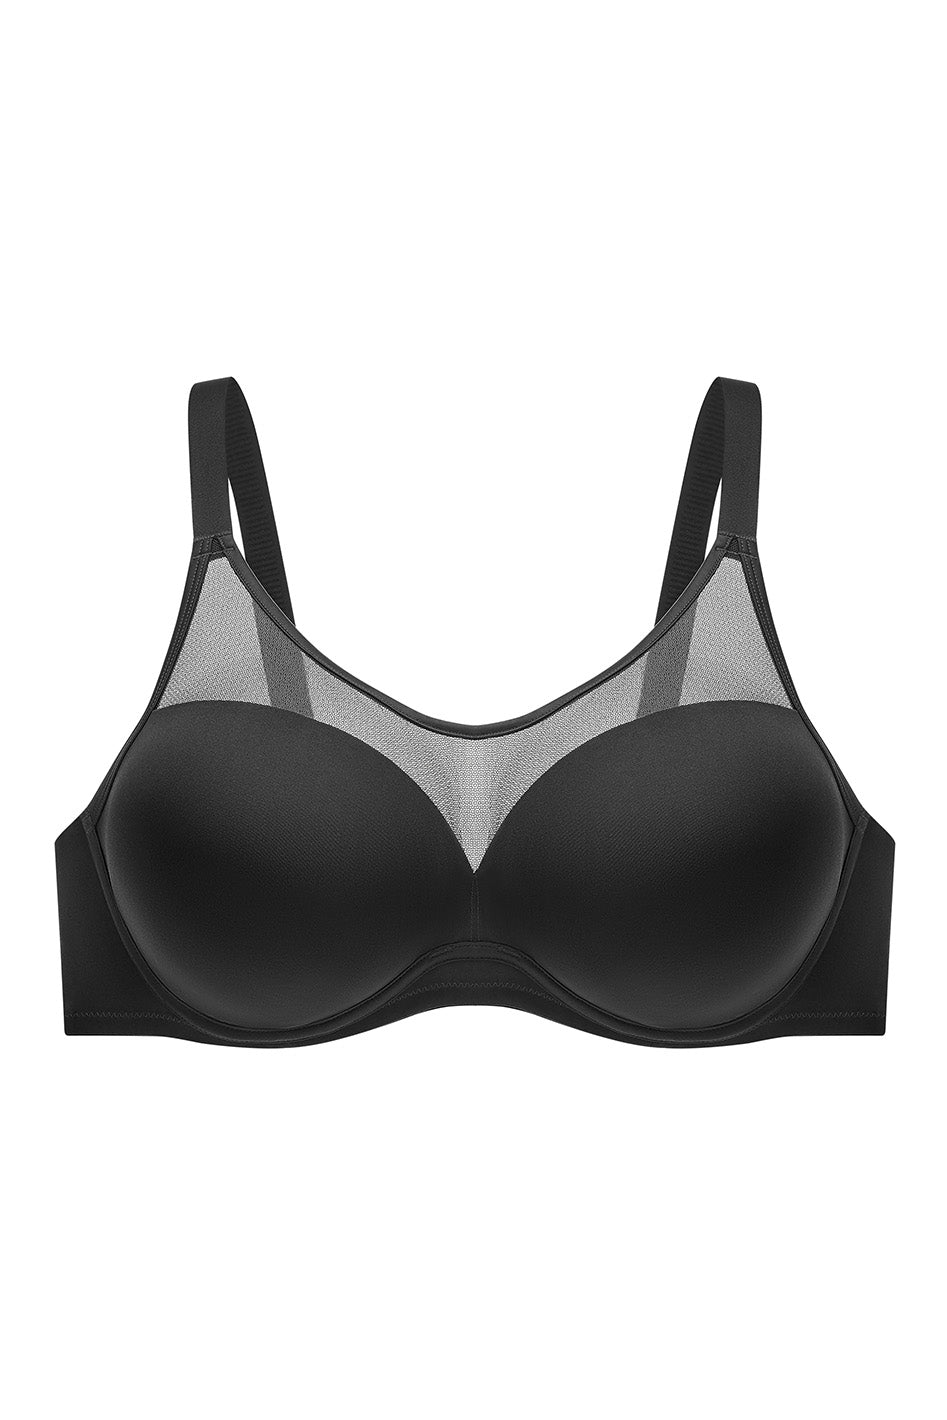 barely there Bra: CustomFlex Fit Full-Coverage Seamless Foam Wire